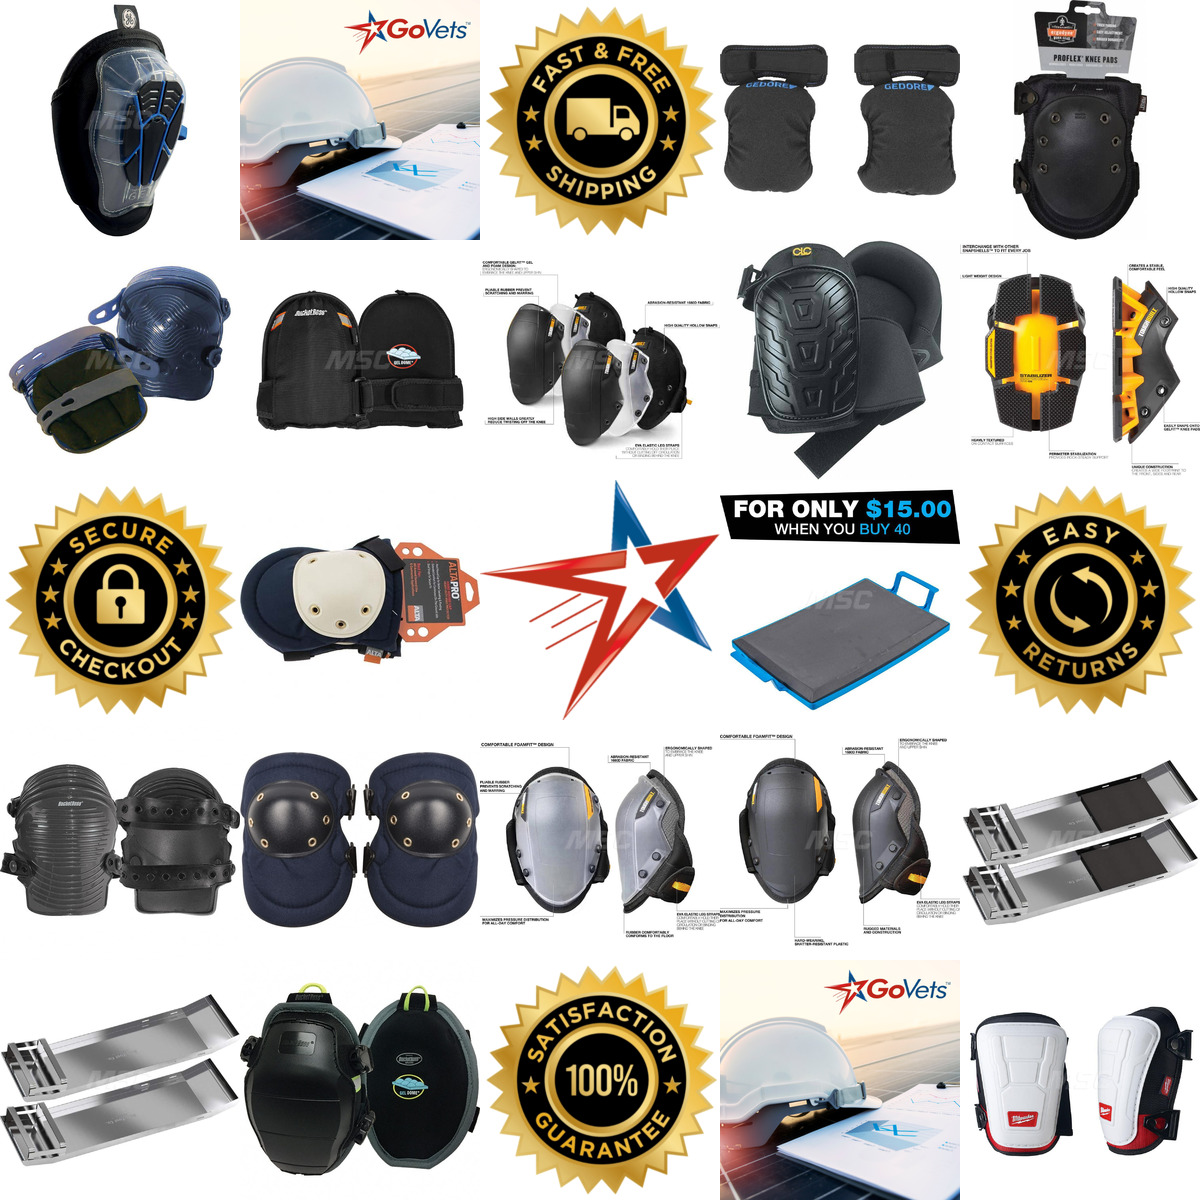 A selection of Knee Pads products on GoVets